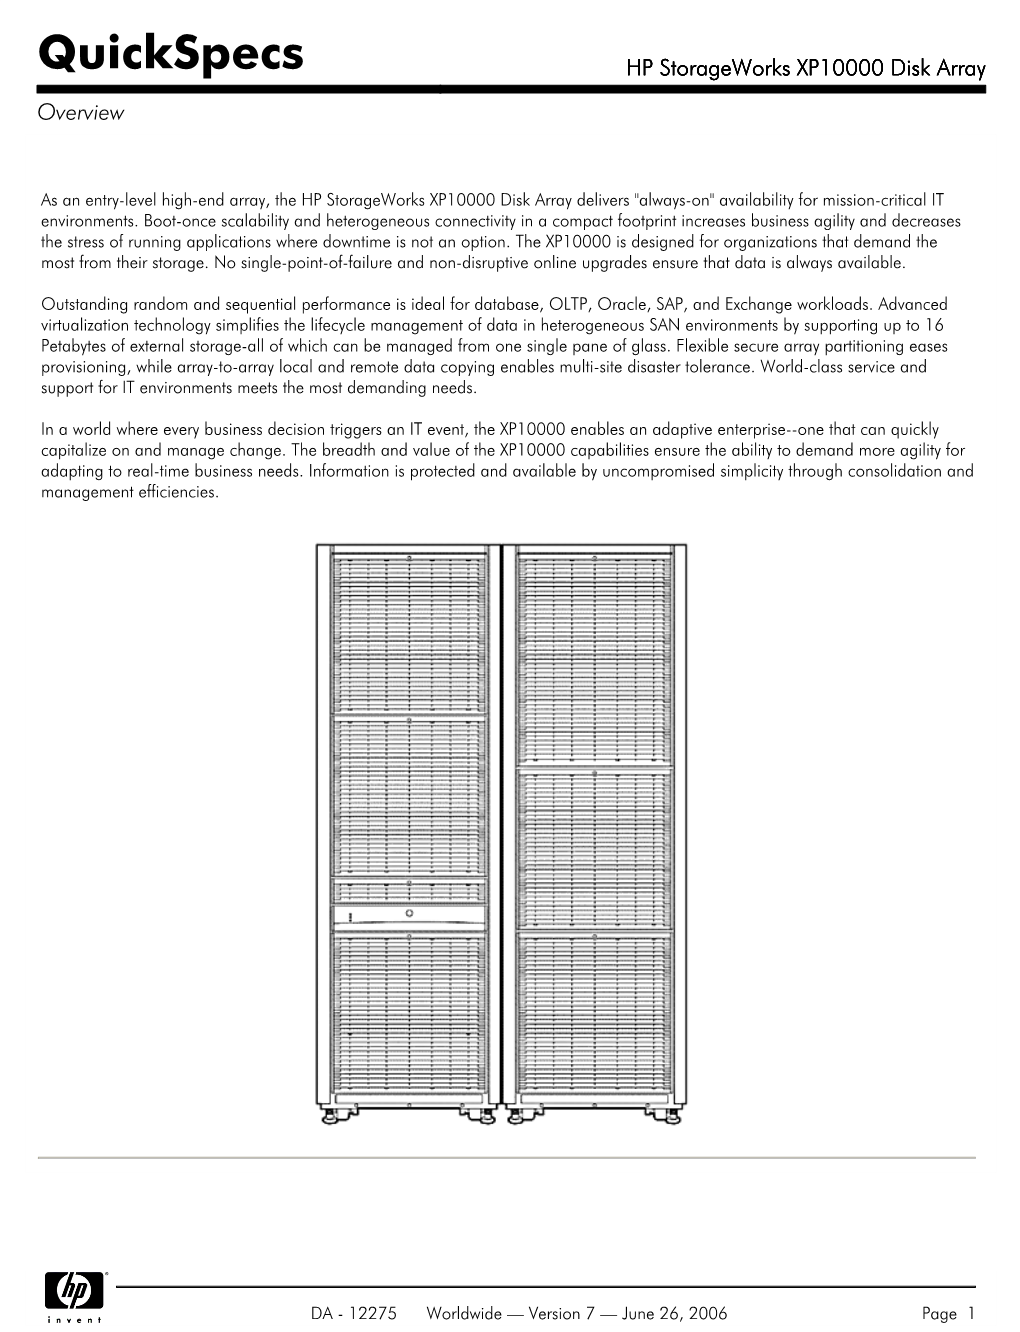 HP Storageworks XP10000 Disk Array Overview